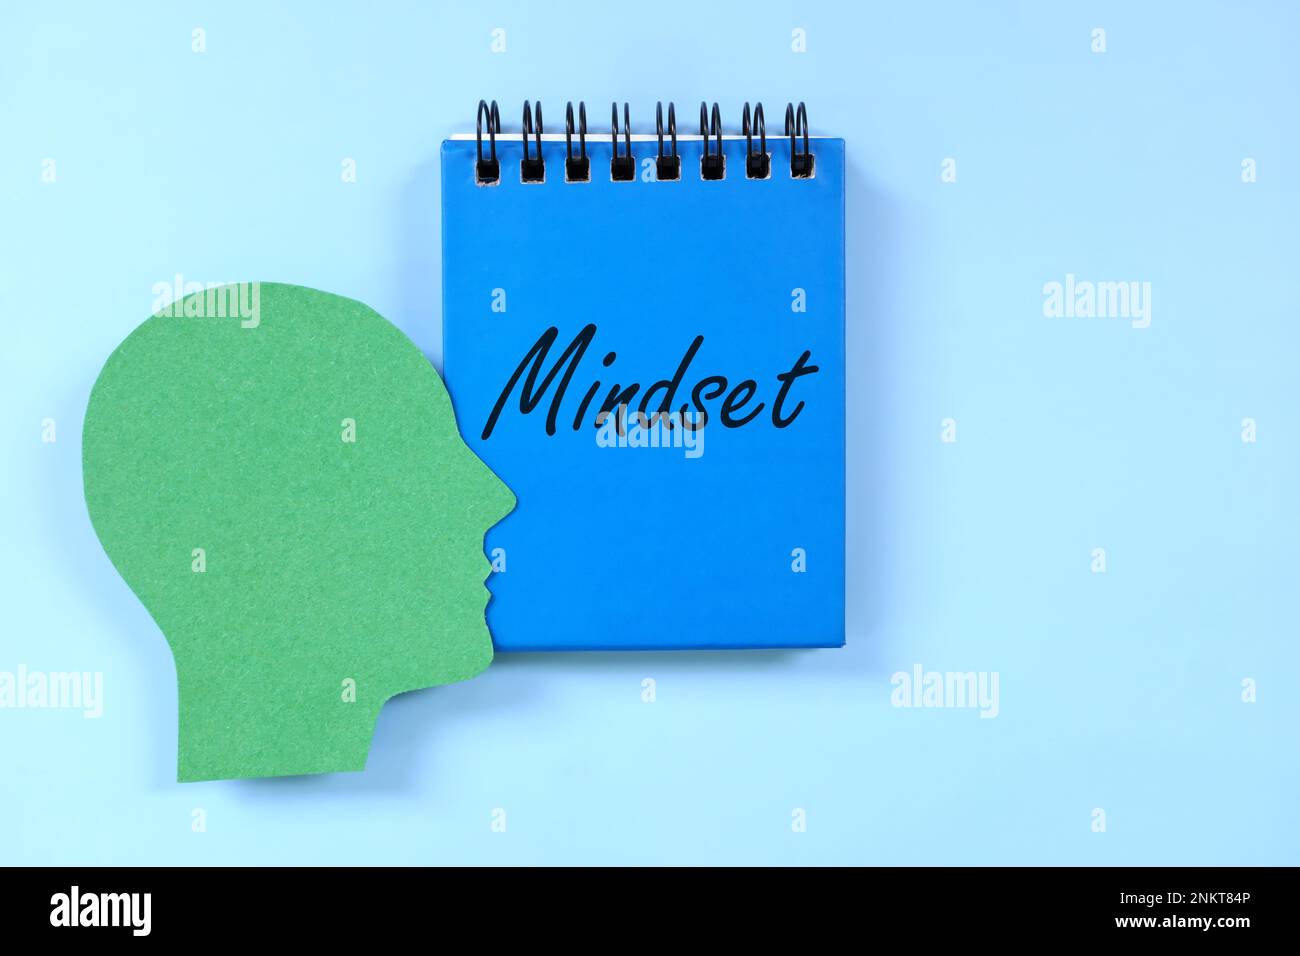 Proper mindset in personal development concept. Human head profile beside blue notepad with written text. Stock Photo